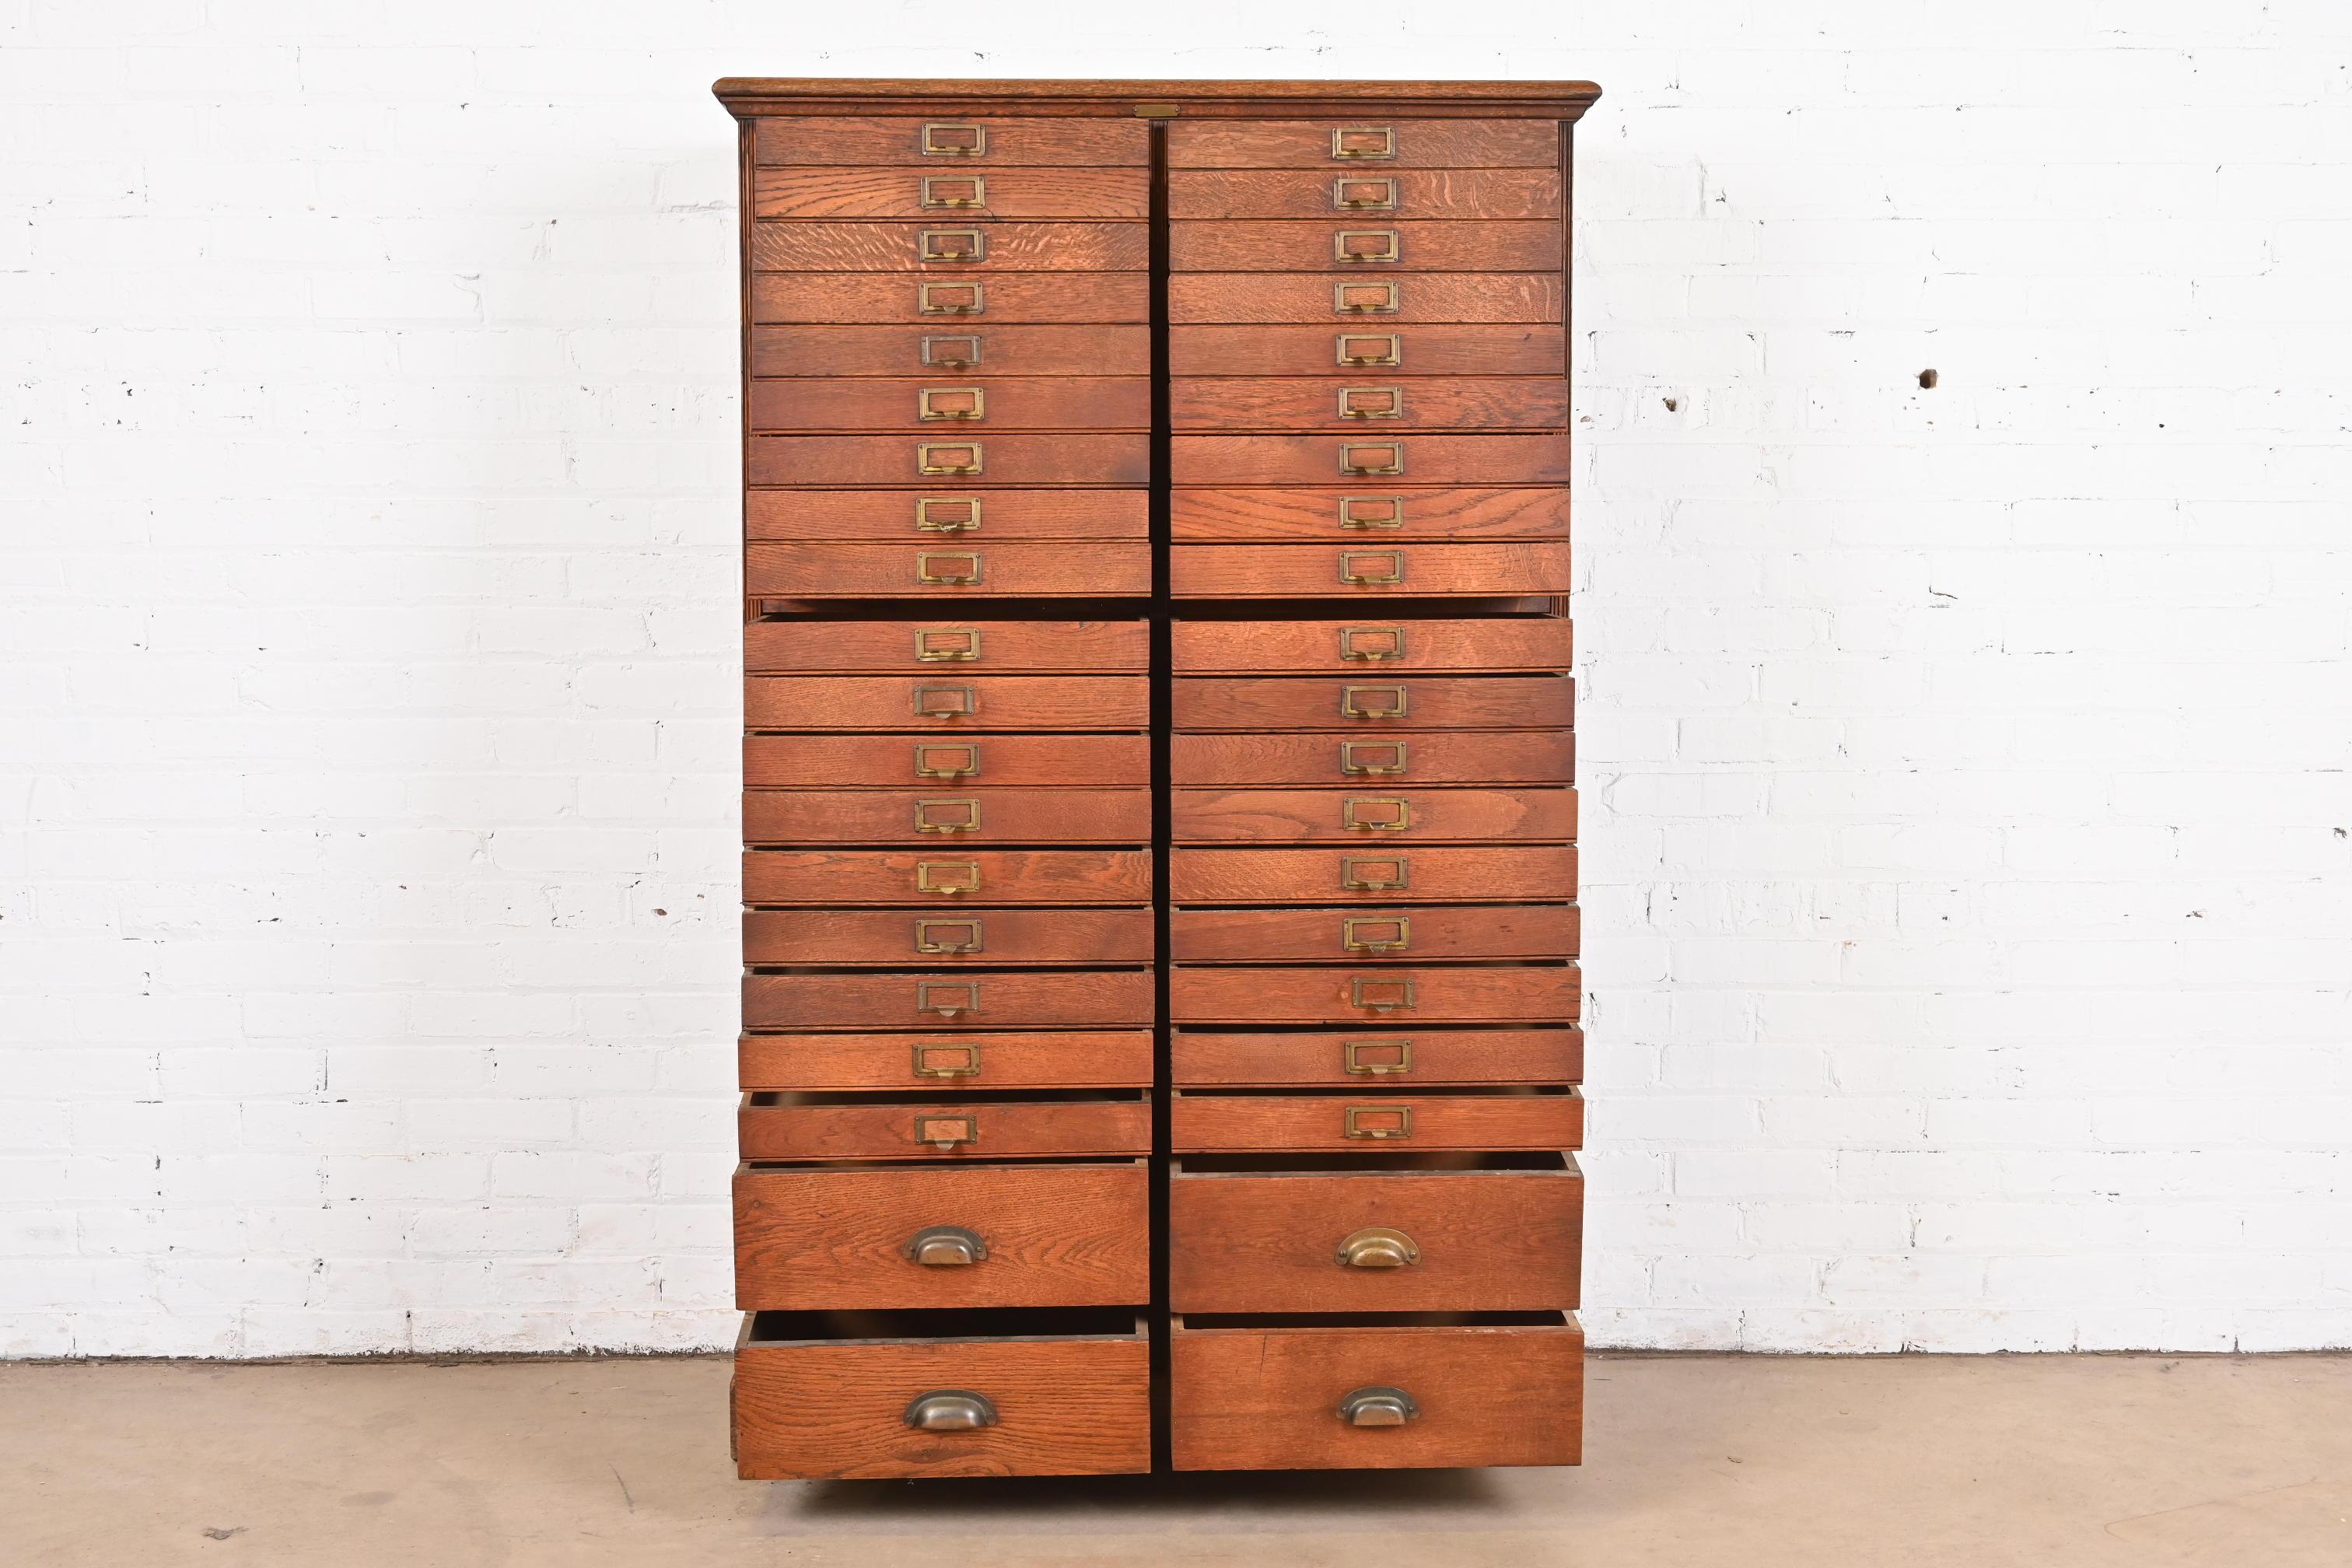 Antique Arts & Crafts Oak 40-Drawer File Cabinet or Chest of Drawers, Circa 1900 For Sale 2